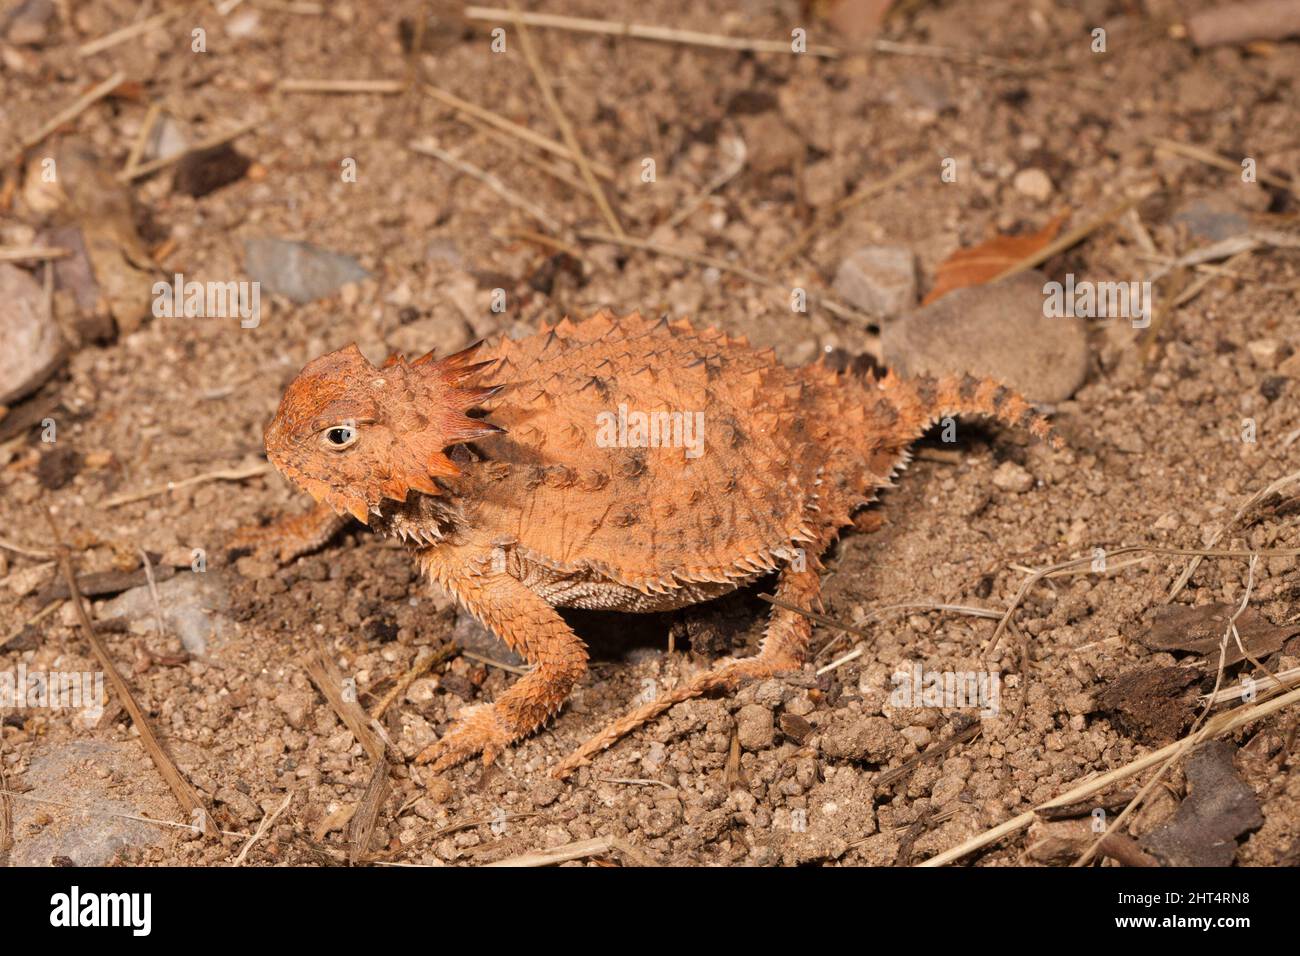 Regal horned lizard (Phrynosoma solare), in defensive posture. It can squirt blood, possibly foul-tasting, from its eyes if threatened. Another defens Stock Photo